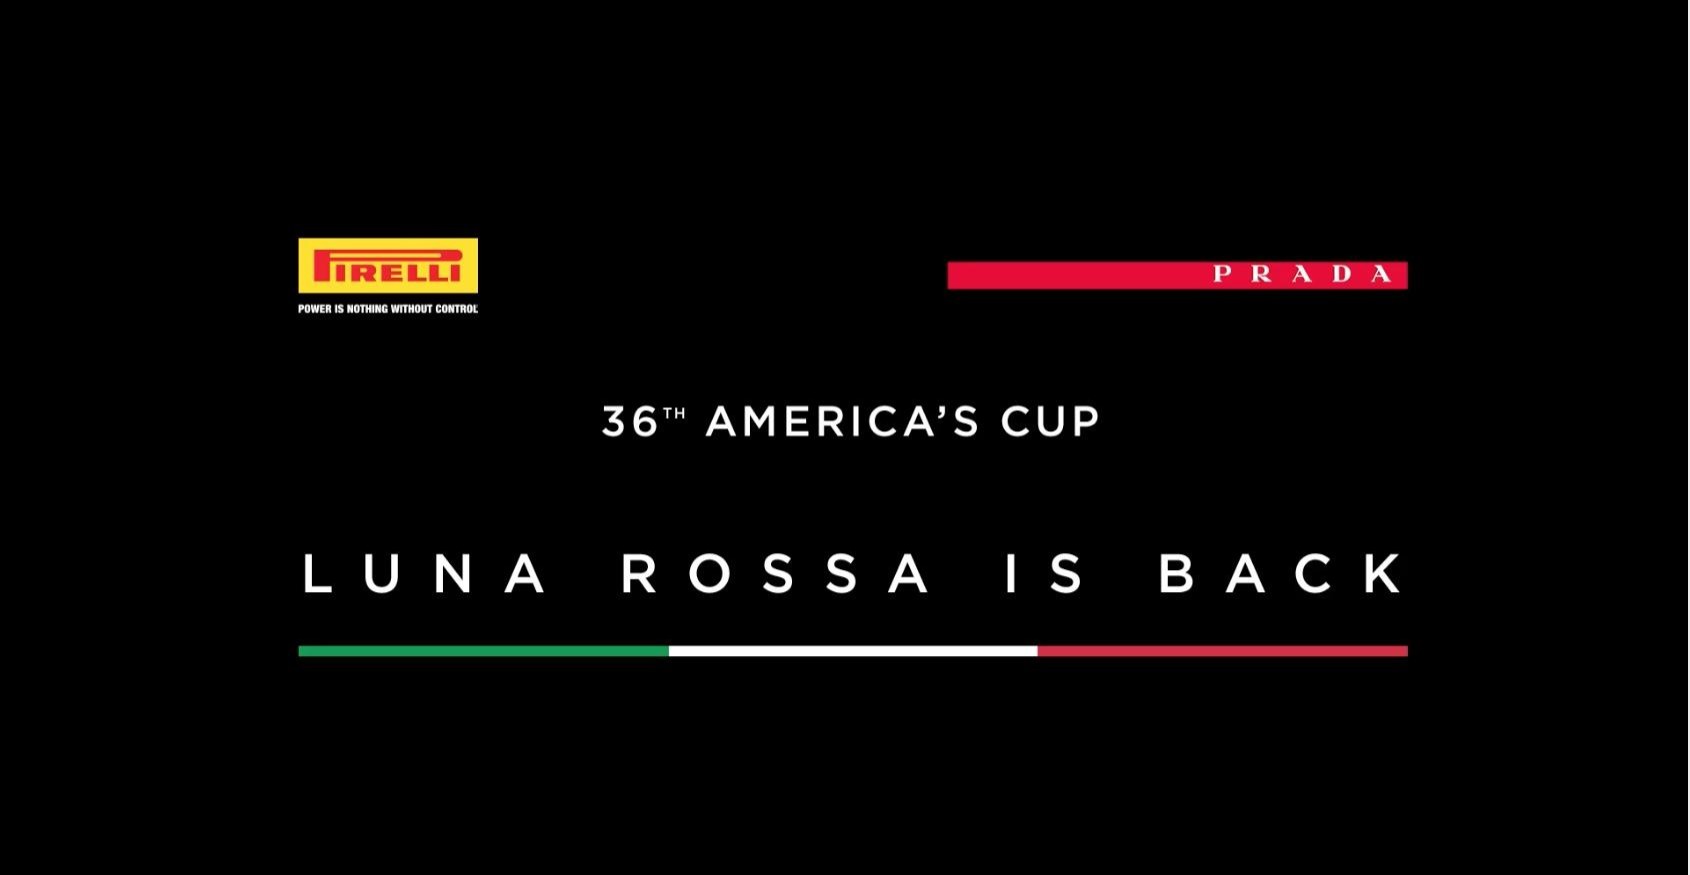 Pirelli and Prada together for Luna Rossa’s new America’s Cup Challenge